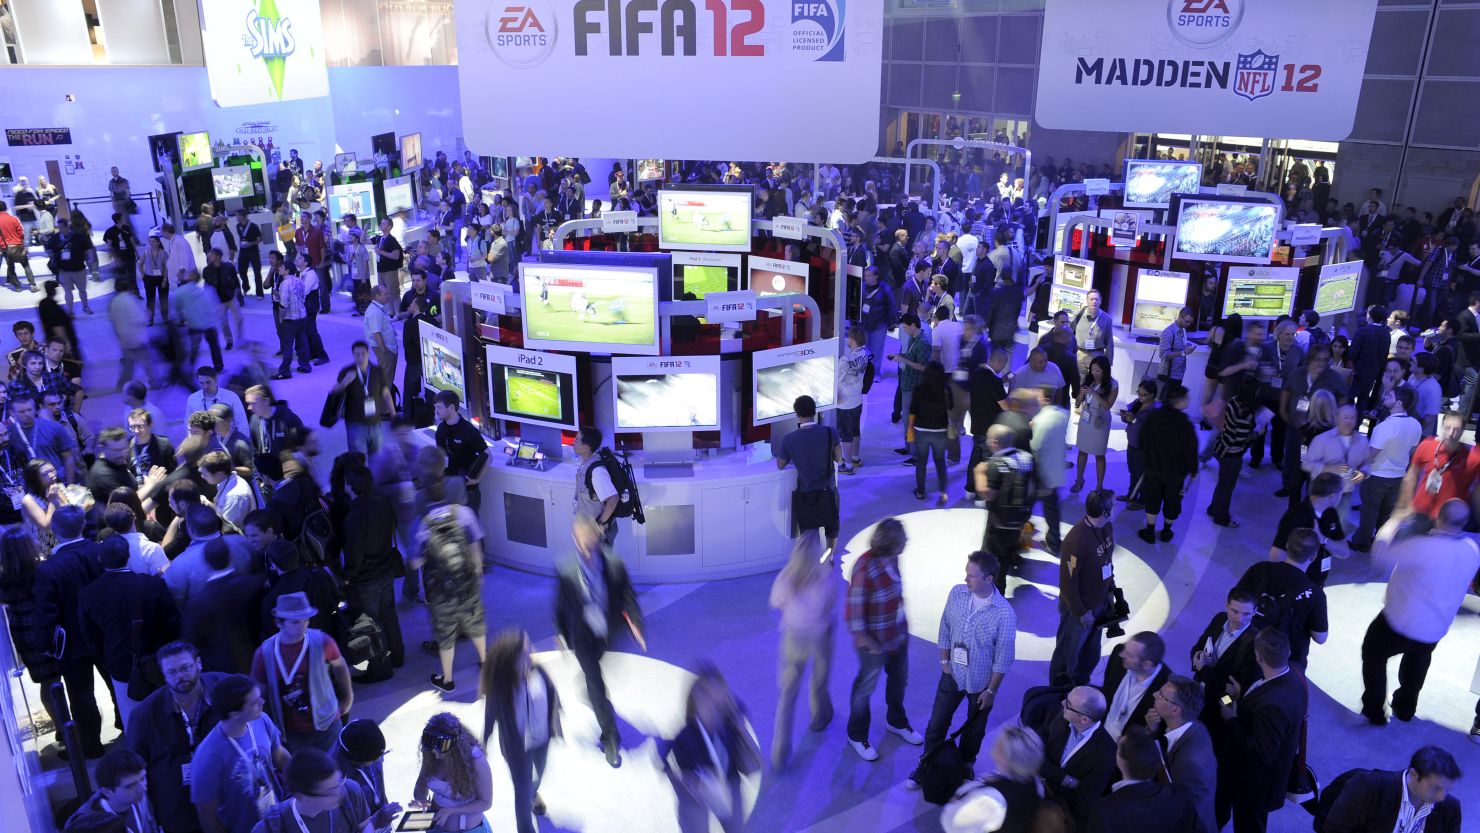 The show floor of E3, the year's biggest video game show, always buzzes with new games and gaming systems.